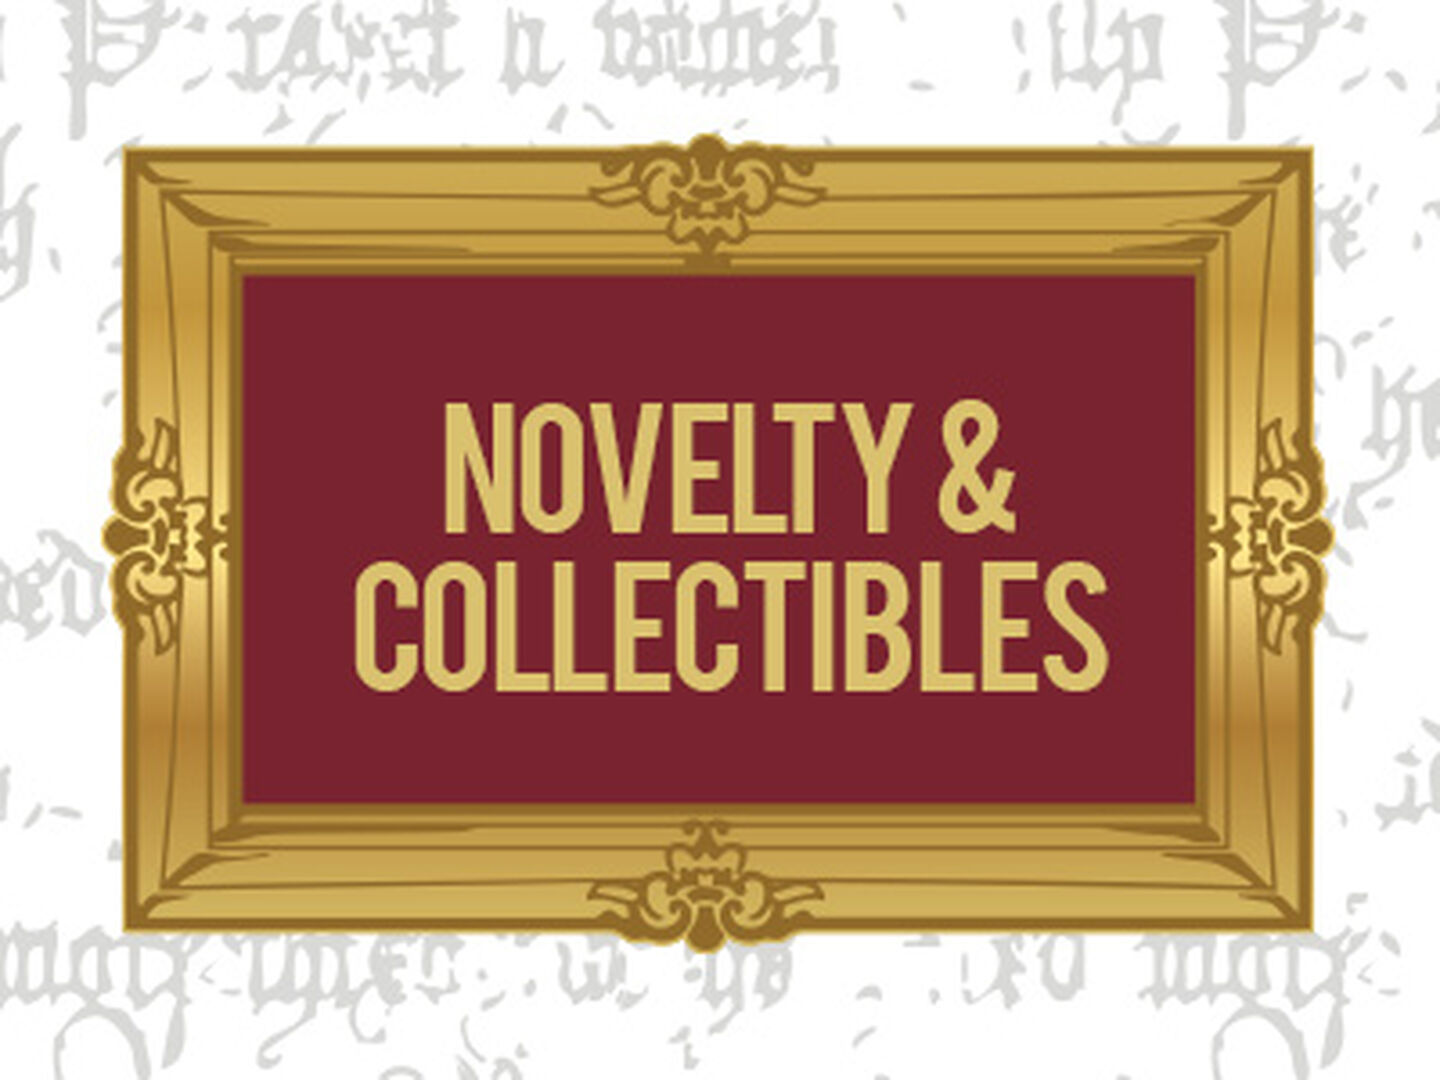 Harry Potter Novelty & Collectibles 